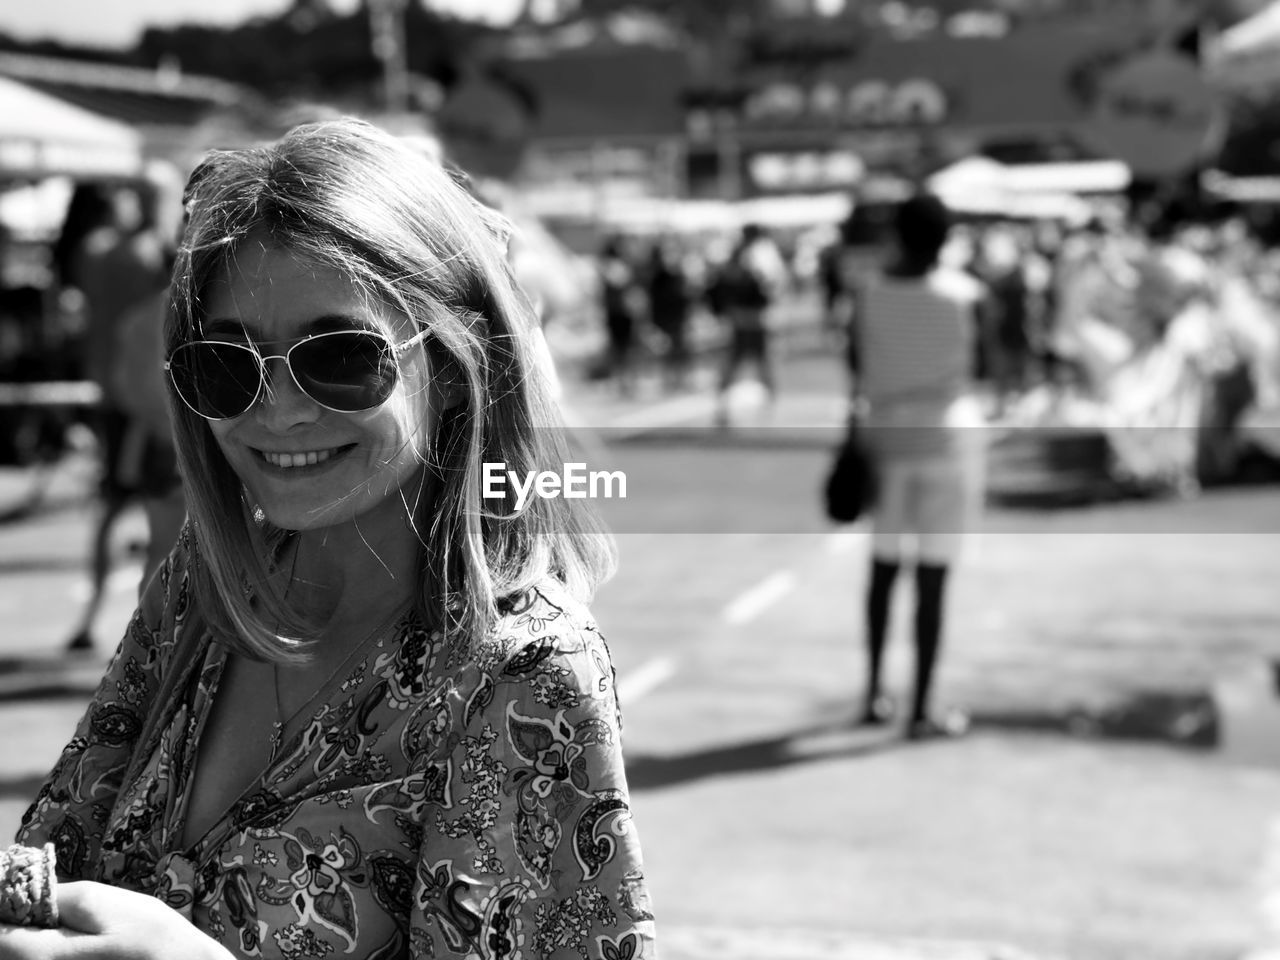 Portrait of young woman standing in city wearing sunglasses smiling while on her mobile phone